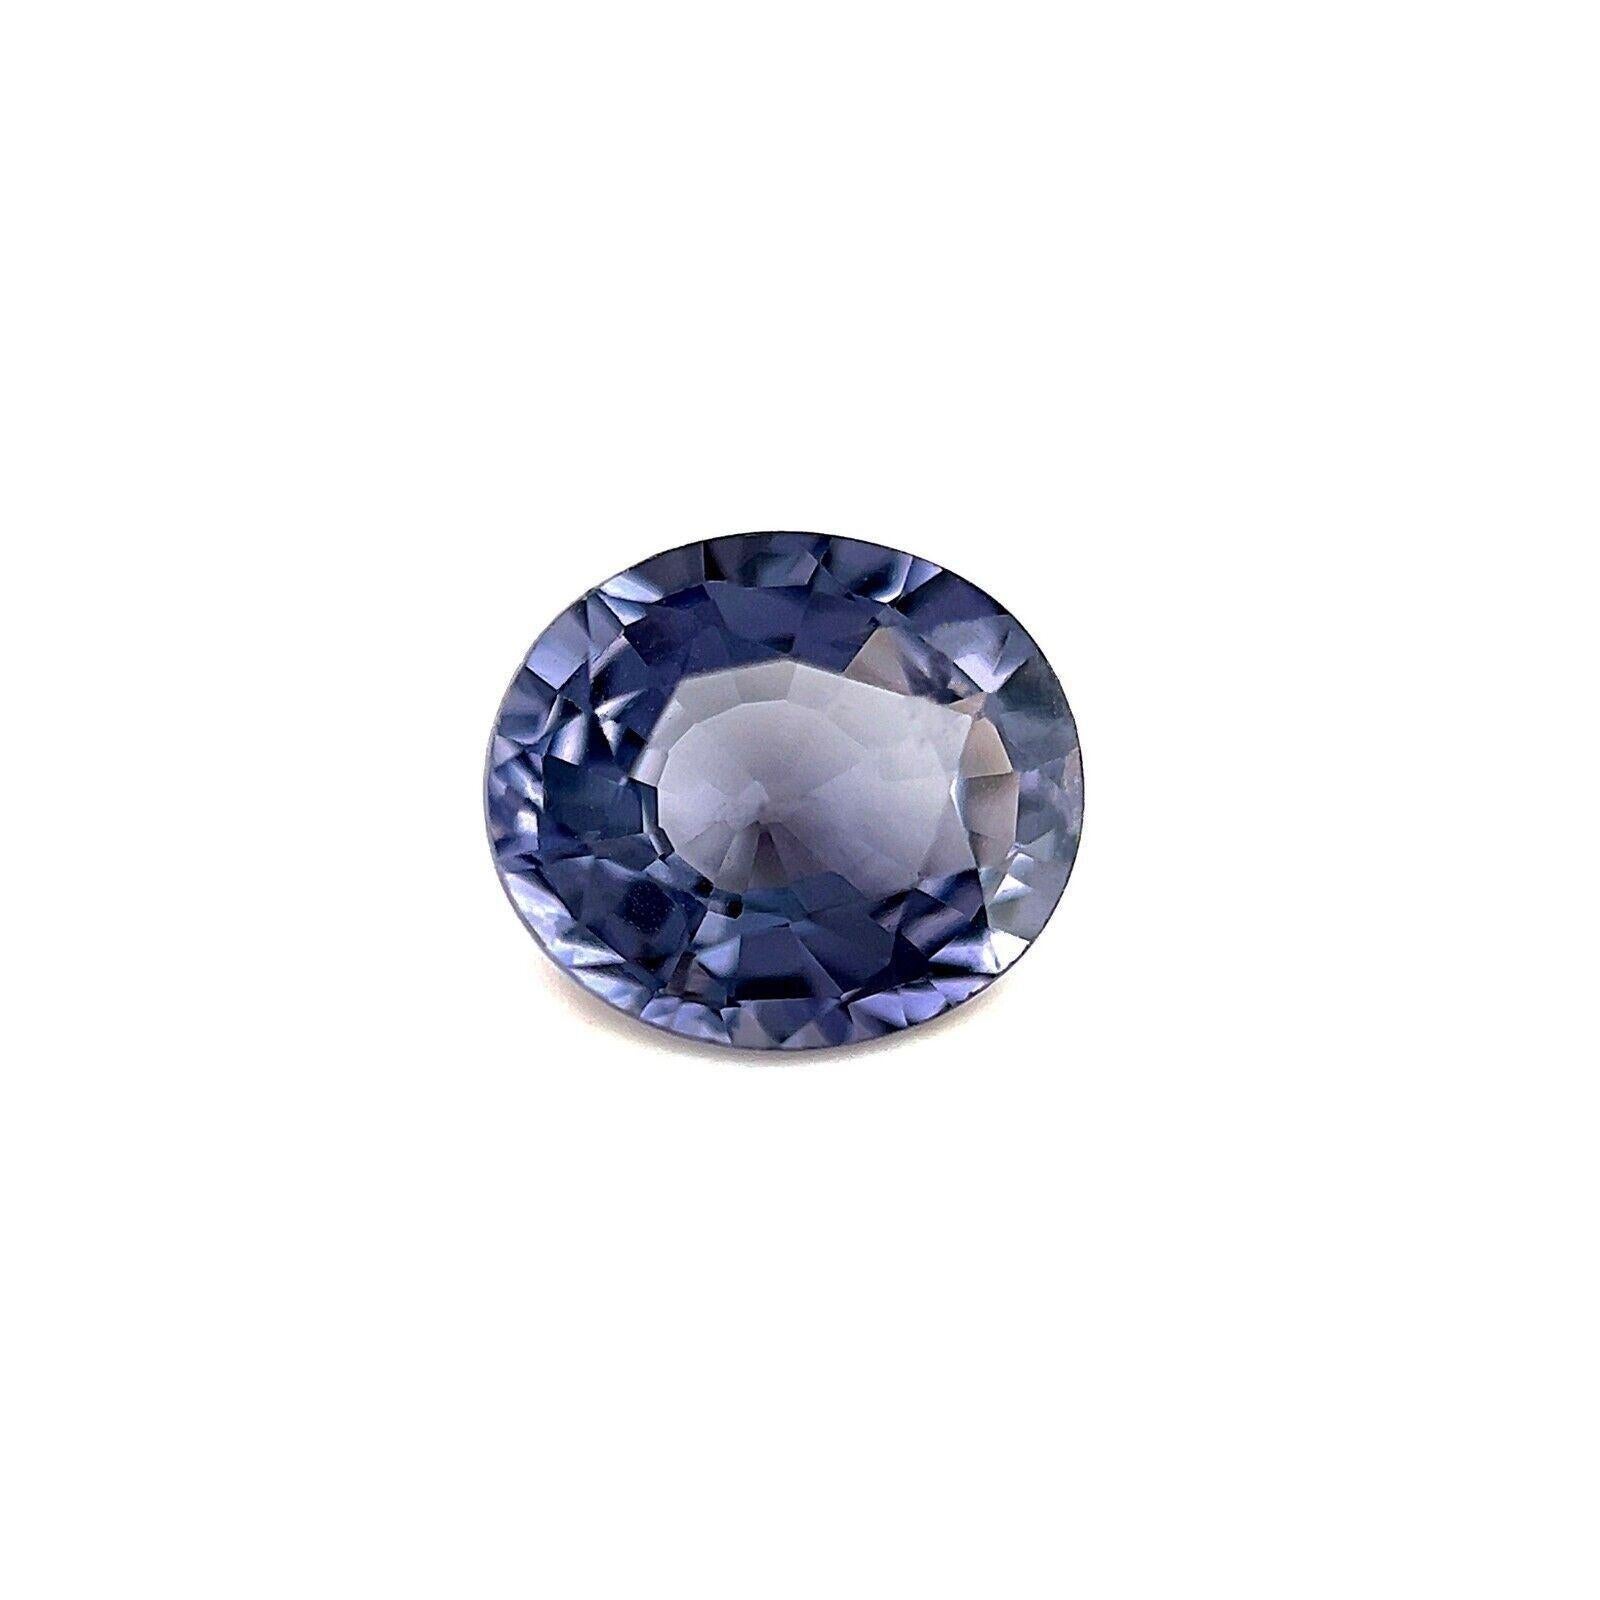 Fine 'Titanium' Spinel 1.63ct Purple Blue Oval Cut 8x6.8mm Loose Rare Gem

Natural Grey Blue Purple 'Titanium' Spinel Gemstone.
Beautiful 1.63 Carat spinel with a unique greyish blue purple colour, referred to as 'titanium' in the trade. This spinel